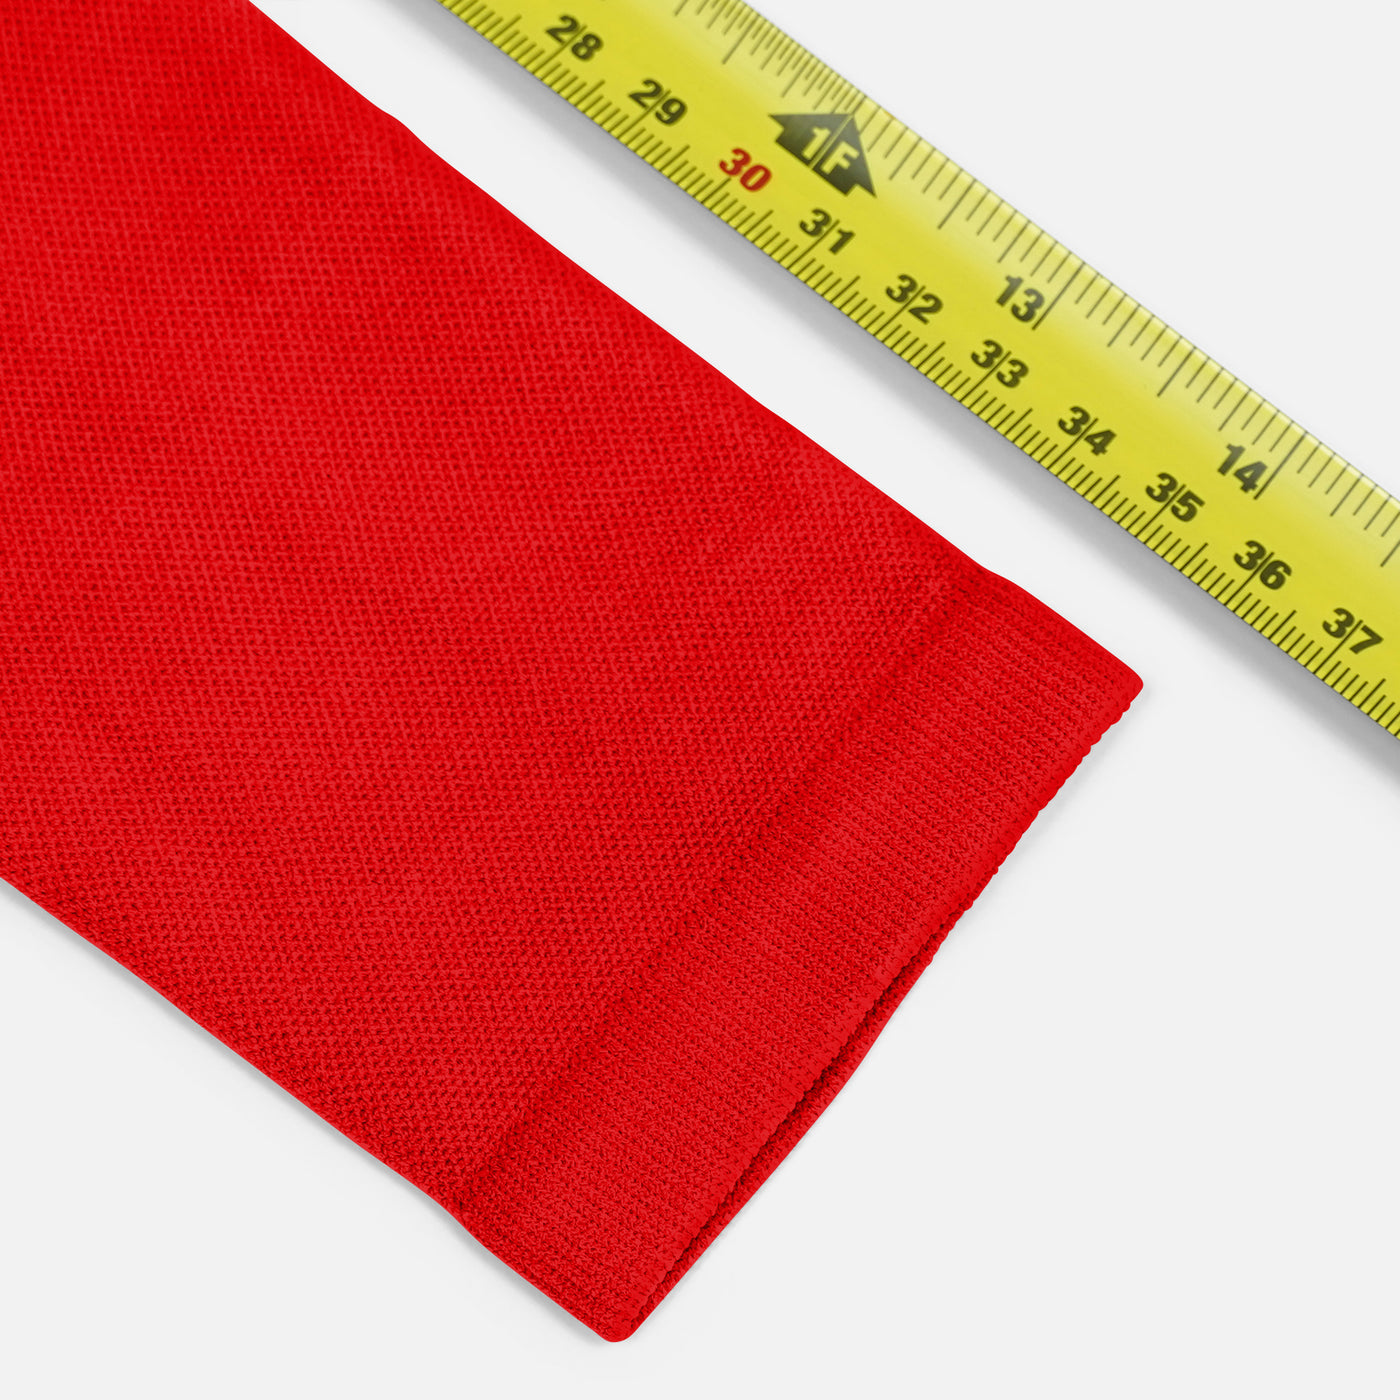 Hue Red One Size Fits All Baseball Arm Sleeve